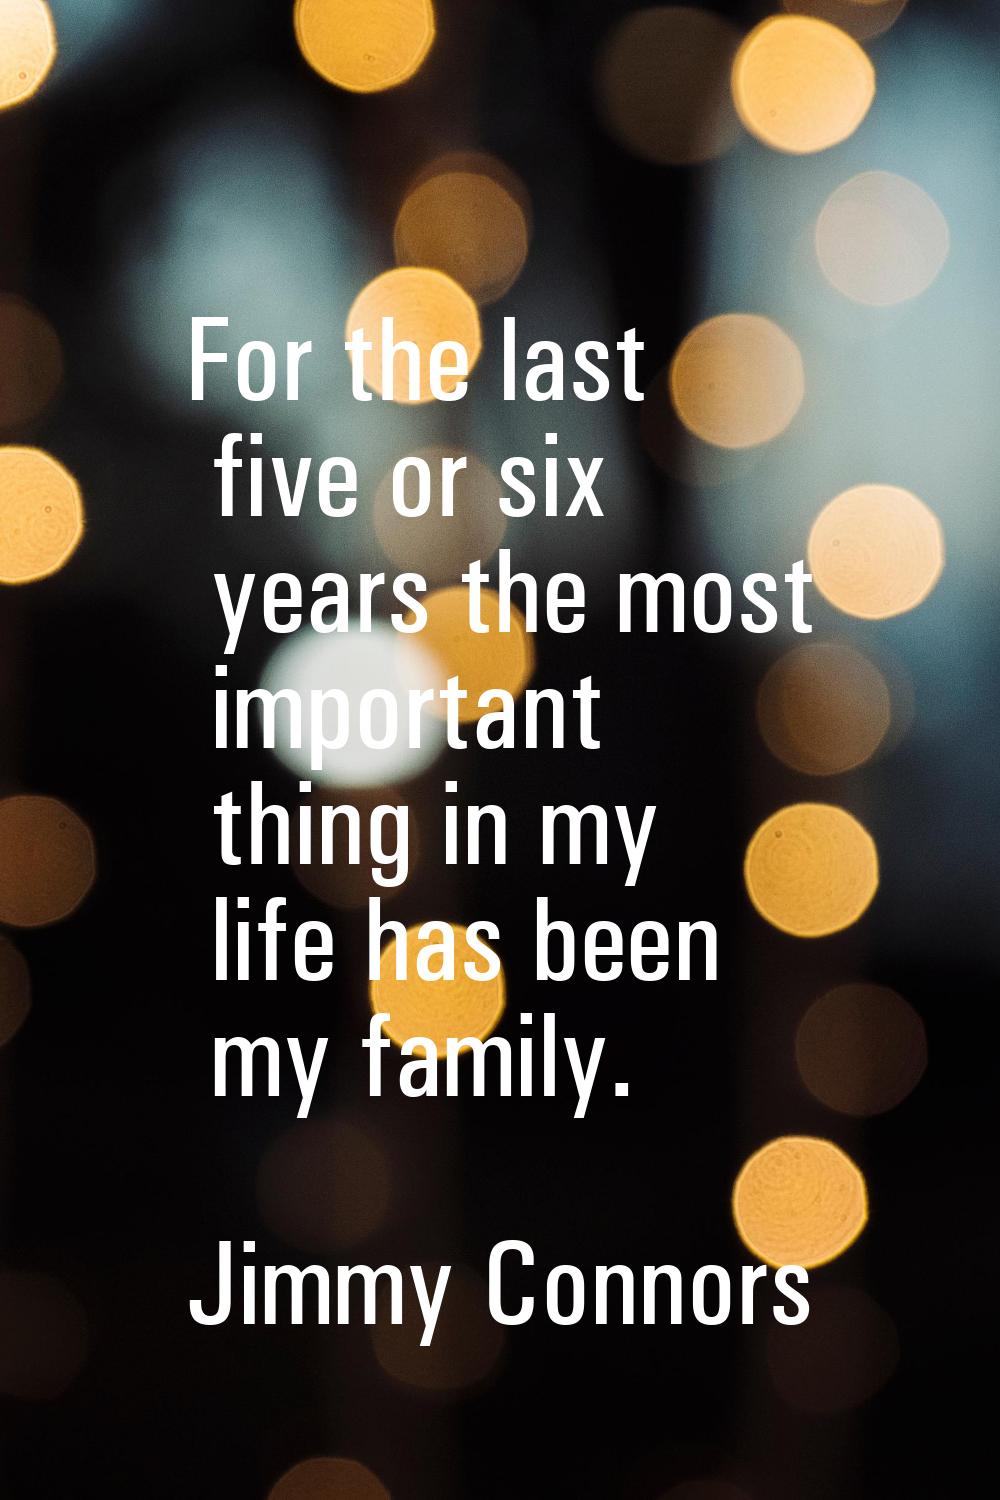 For the last five or six years the most important thing in my life has been my family.